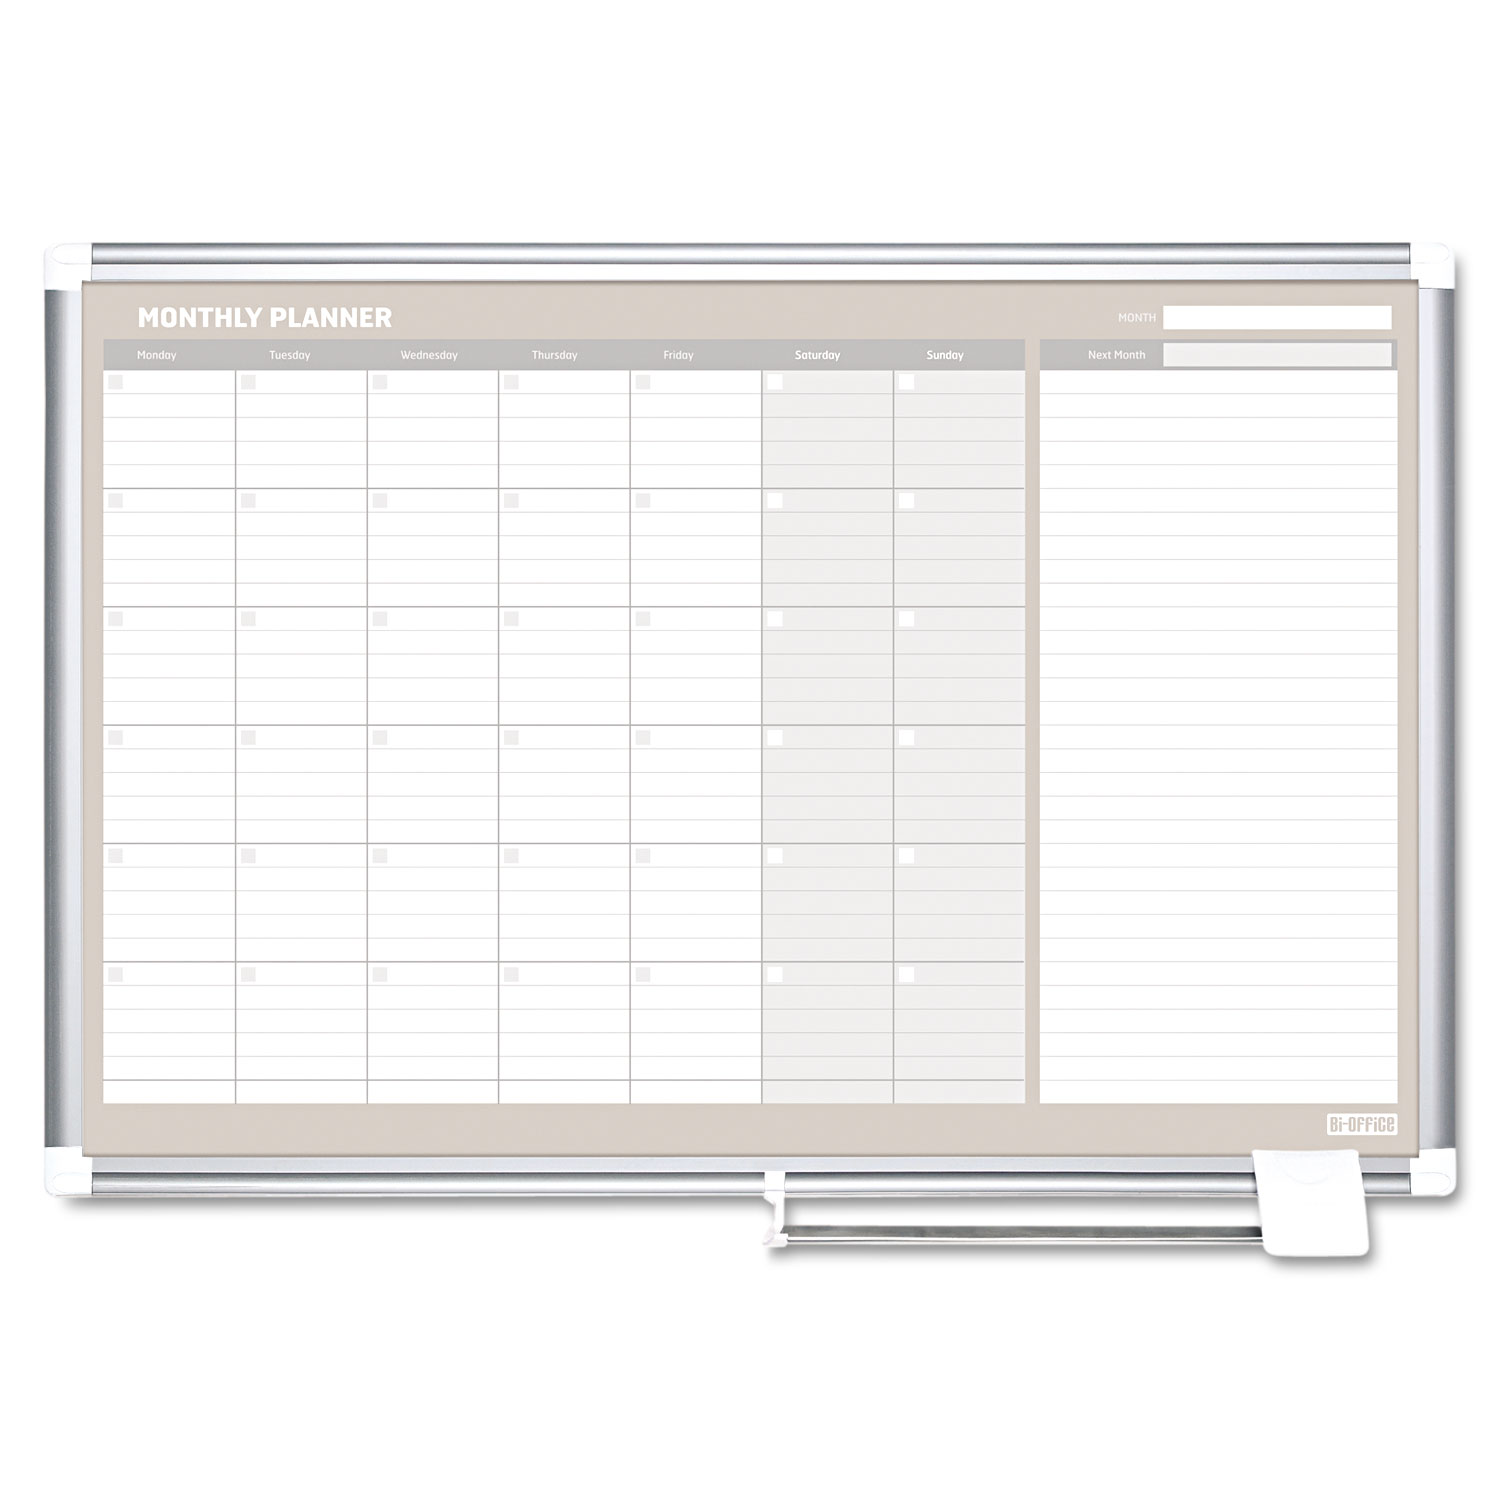  MasterVision GA0597830 Monthly Planner, 48x36, Silver Frame (BVCGA0597830) 